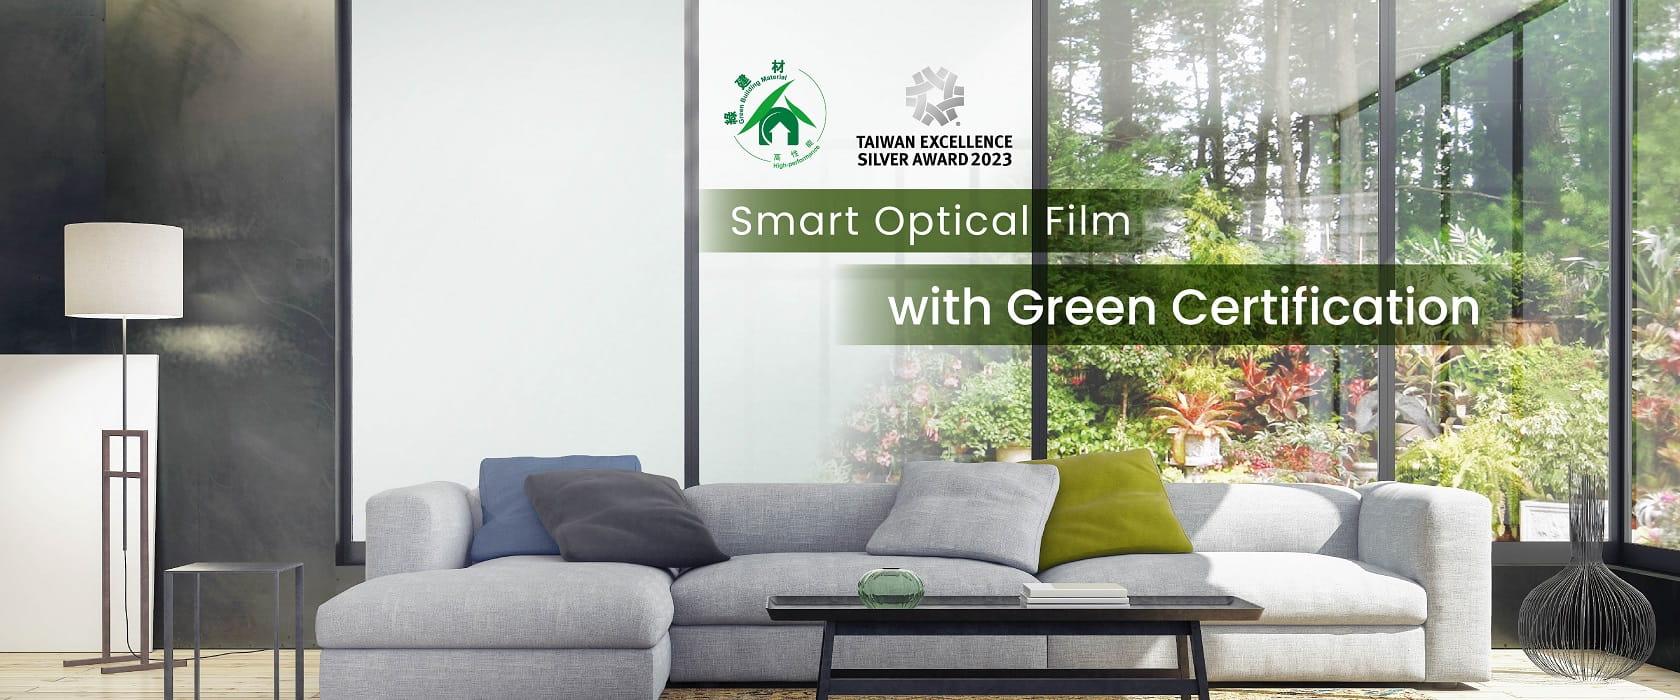 Smart Optical Film with Green Certification